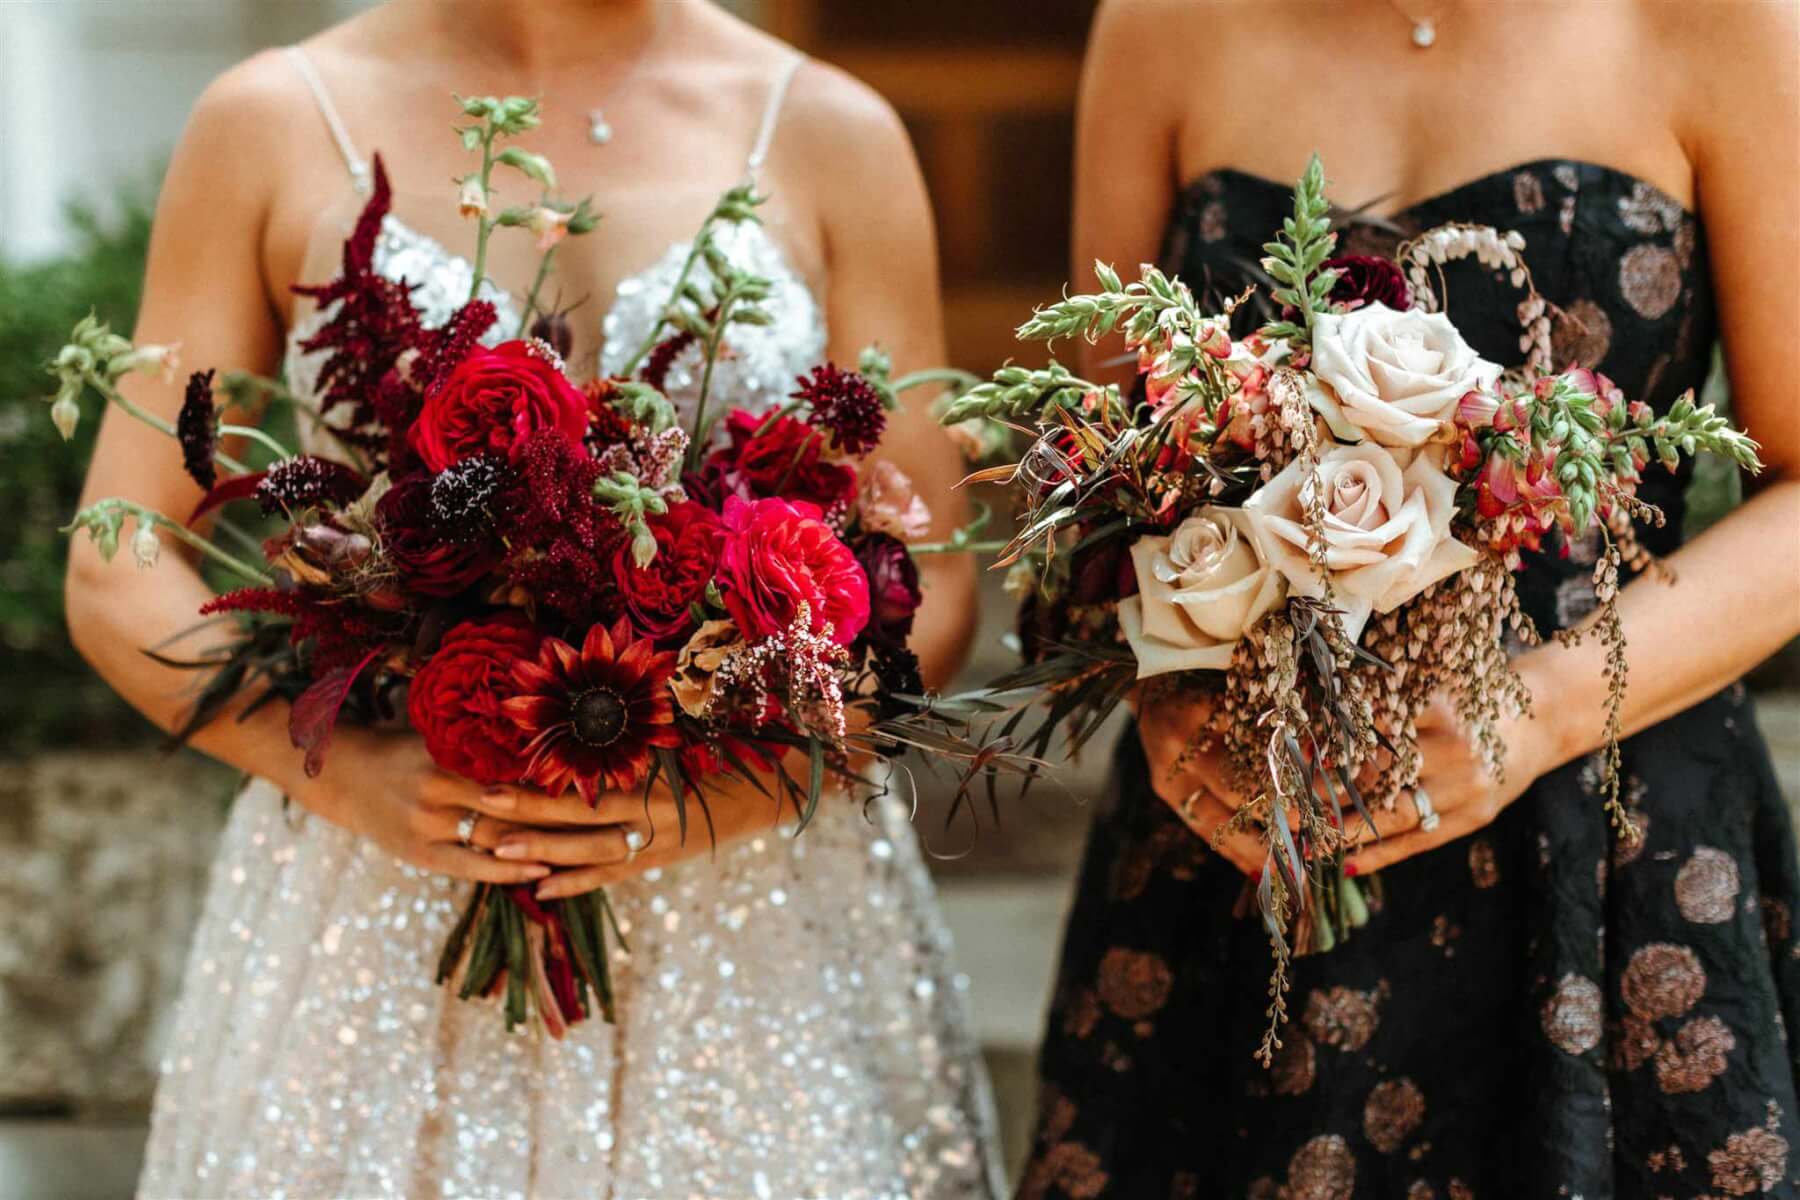 close up of a bride in white holding red flowers and a bridesmaid in a black dress holding pale pink flowers